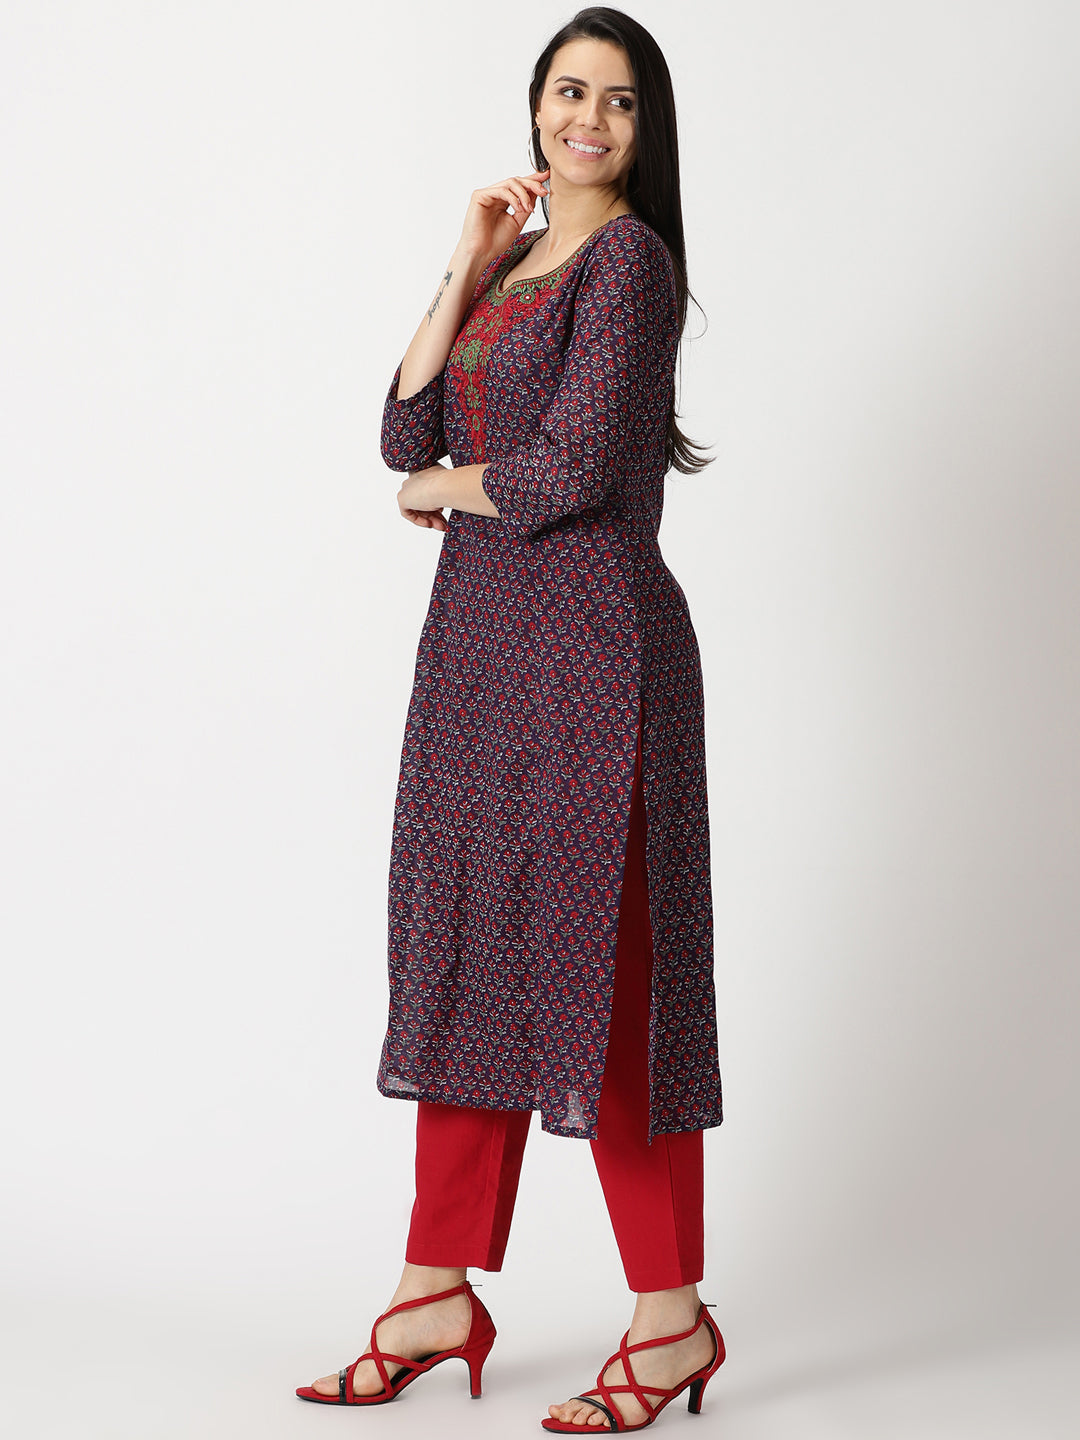 Navy Blue Floral Print Cotton Kurta with Embroidered Neck